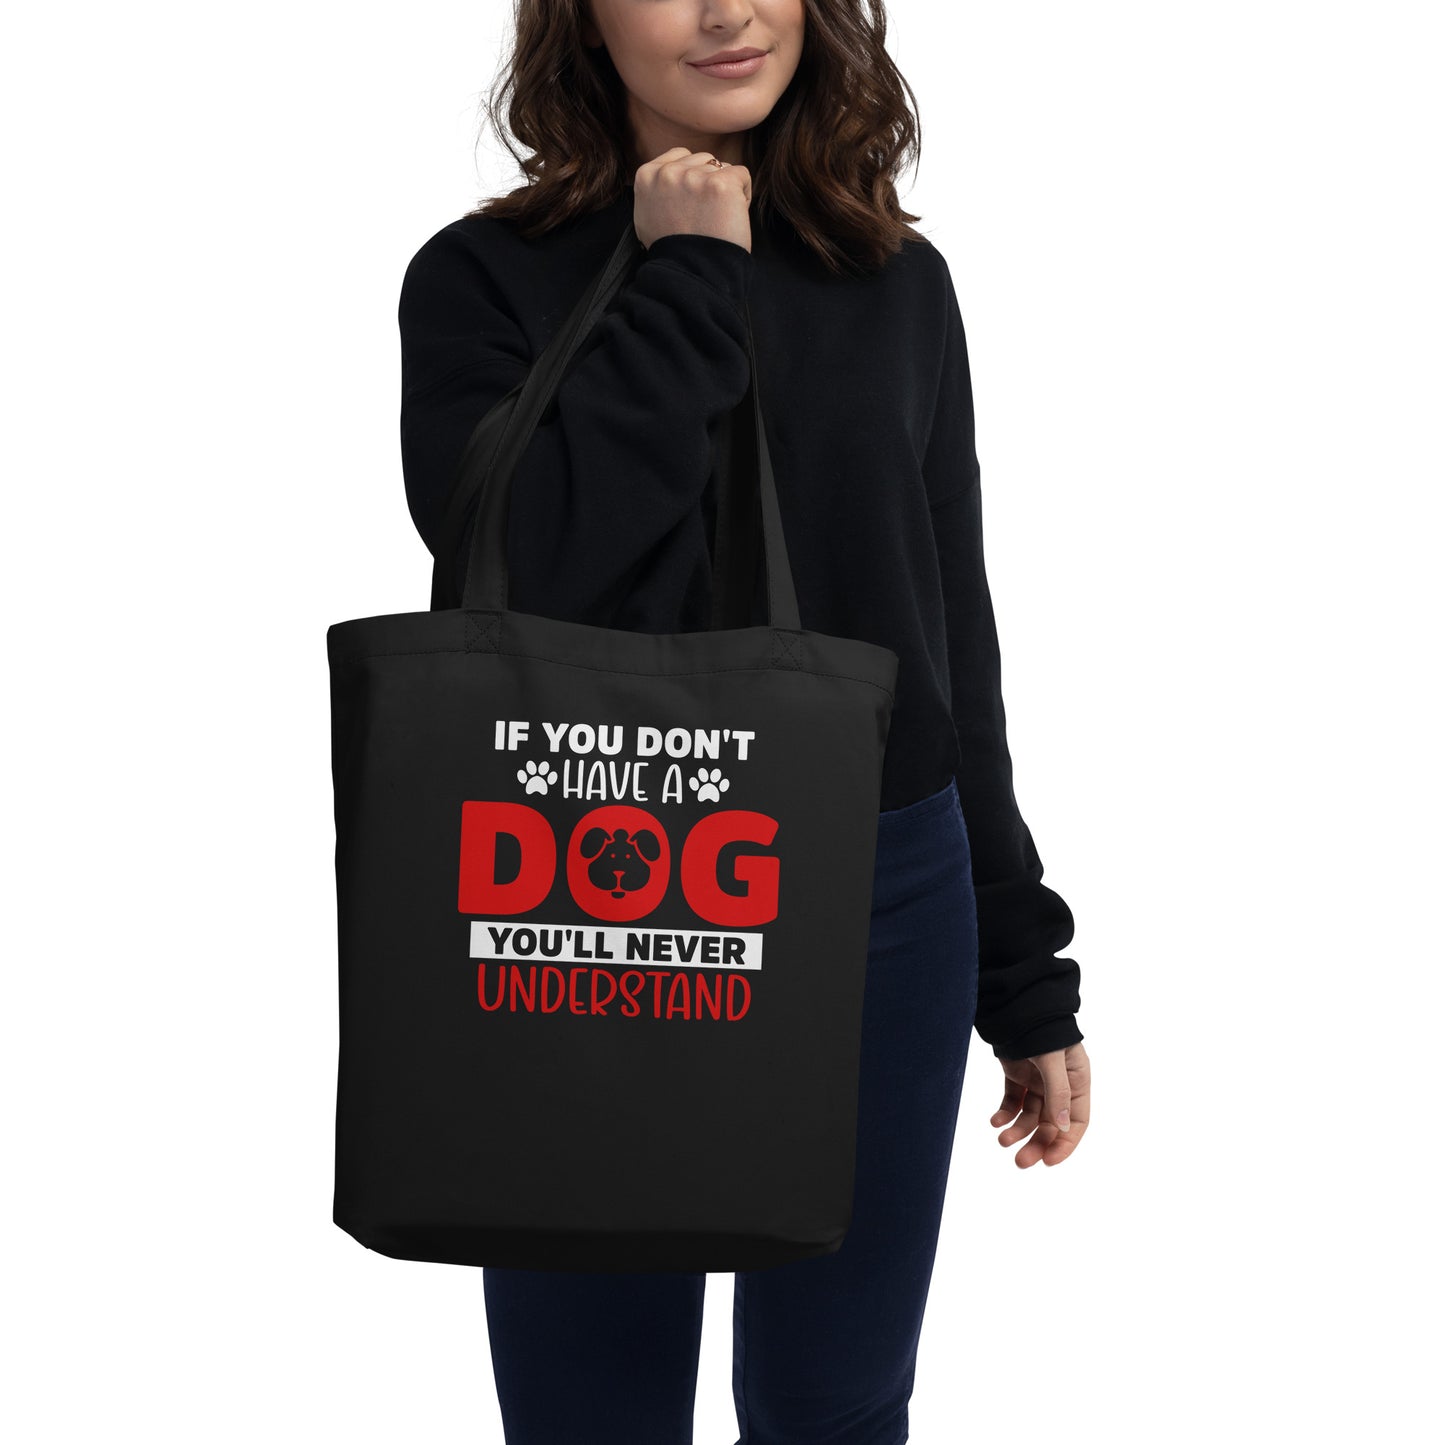 If You Don't Have a Dog You'll Never Understand Eco Tote Bag